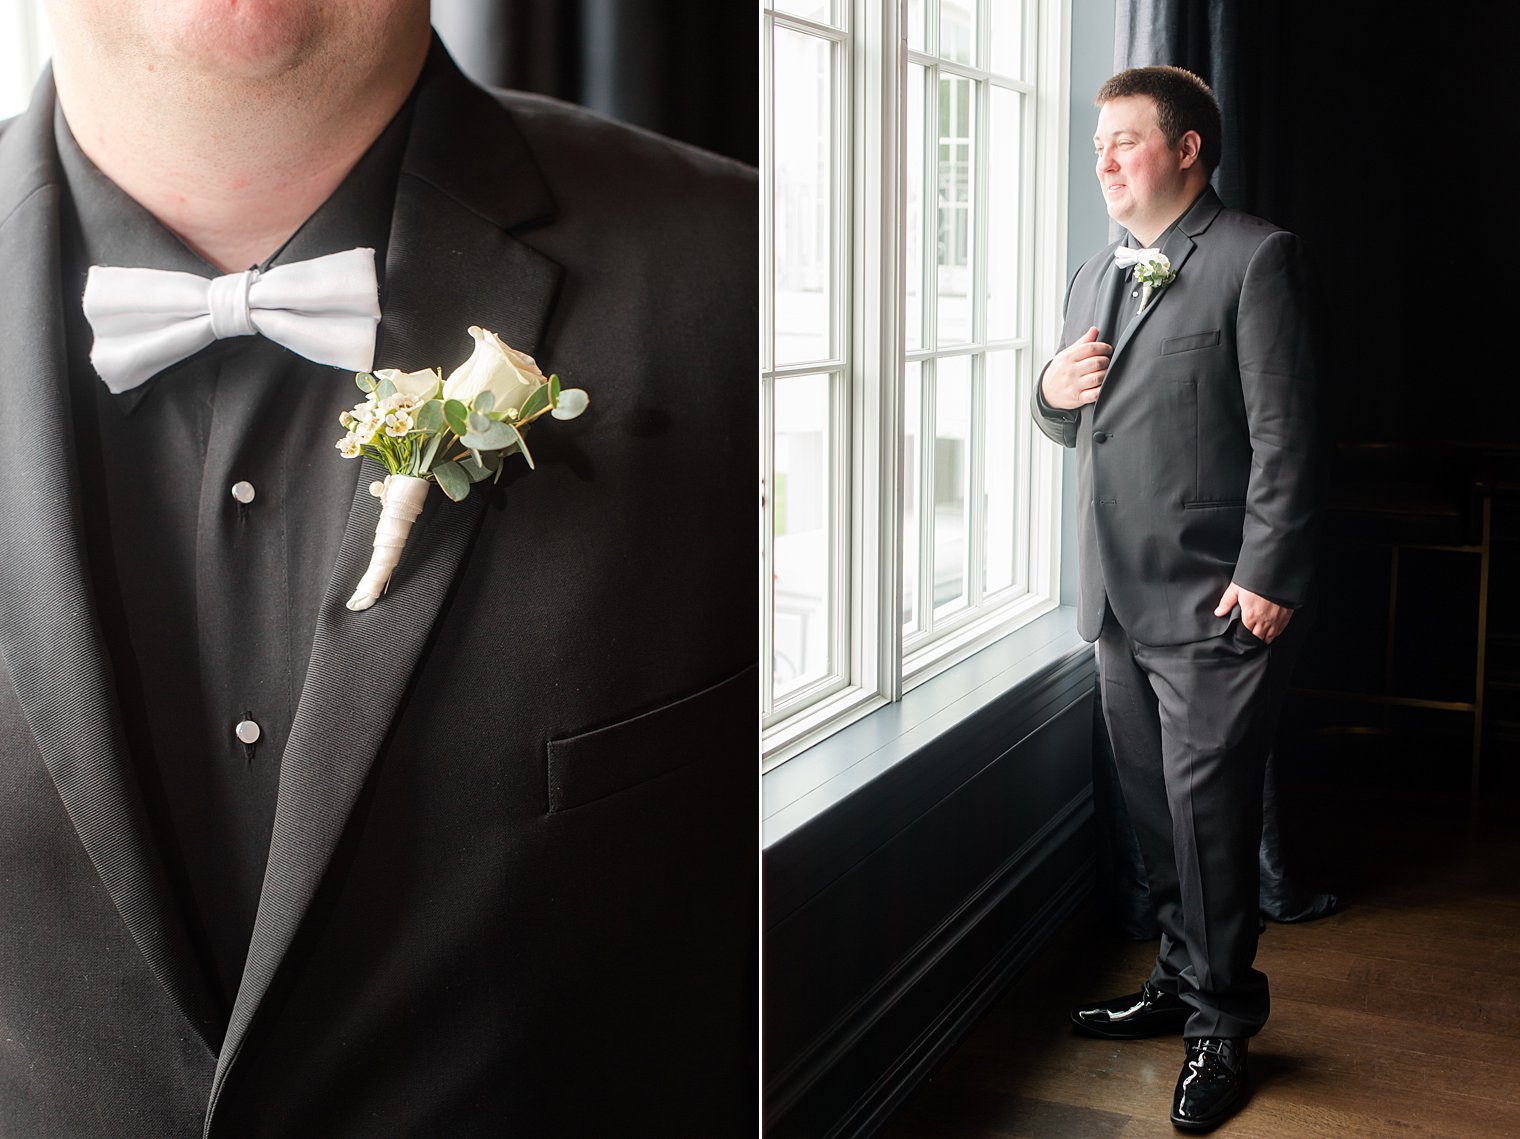 groom looks out window in black suit with white tie before NJ wedding